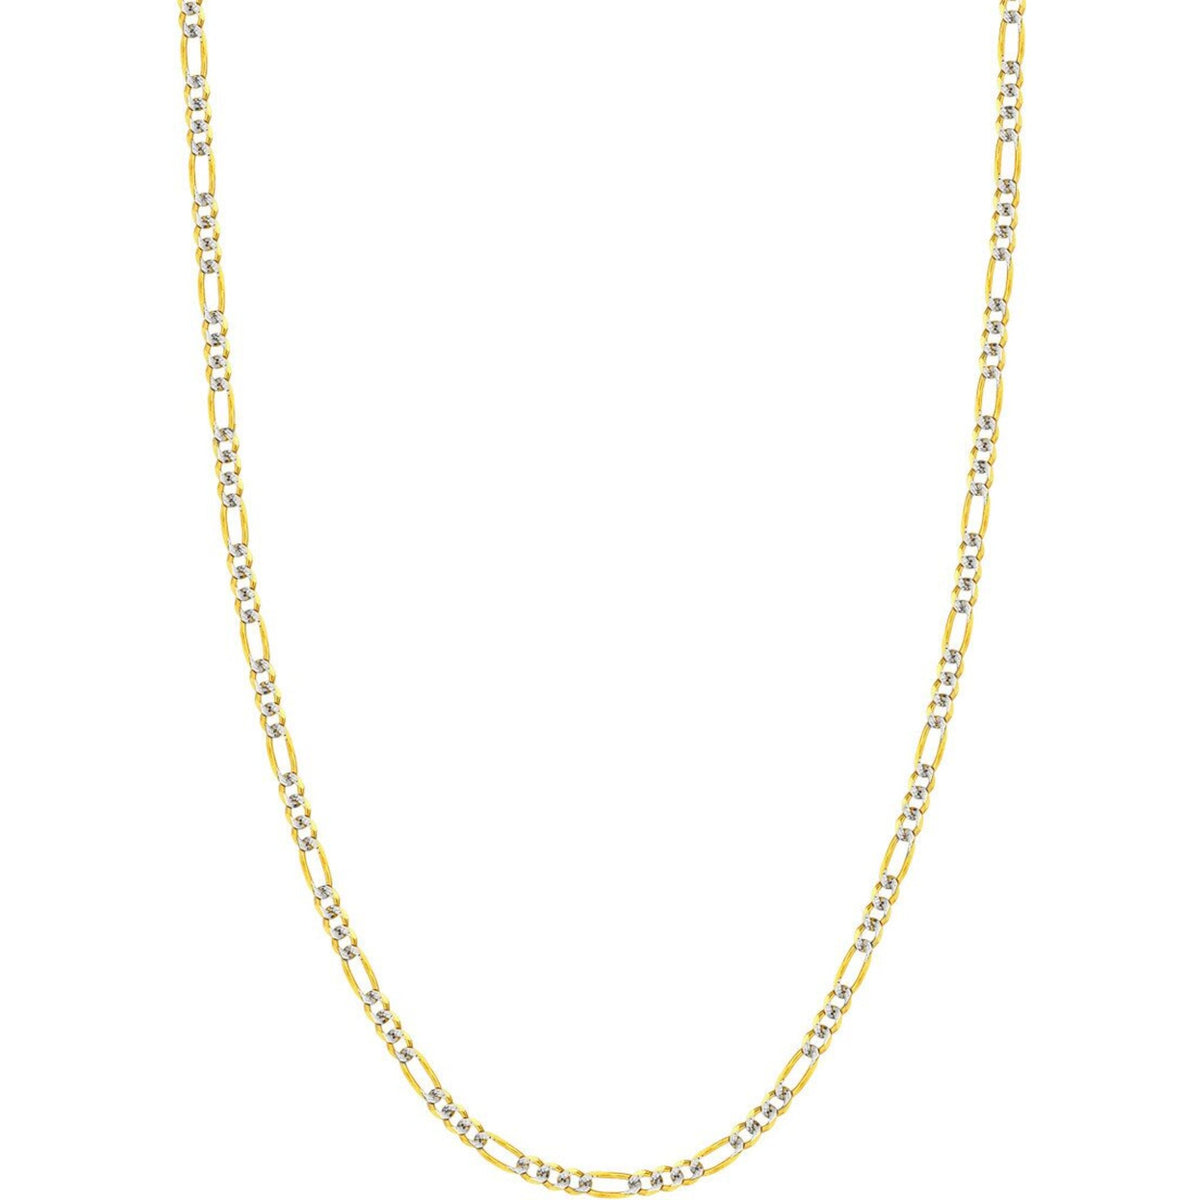 Olas d'Oro 30" Necklace - 14K Yellow/White Gold 3.9mm Two-Tone Pave Figaro Chain with Lobster Lock